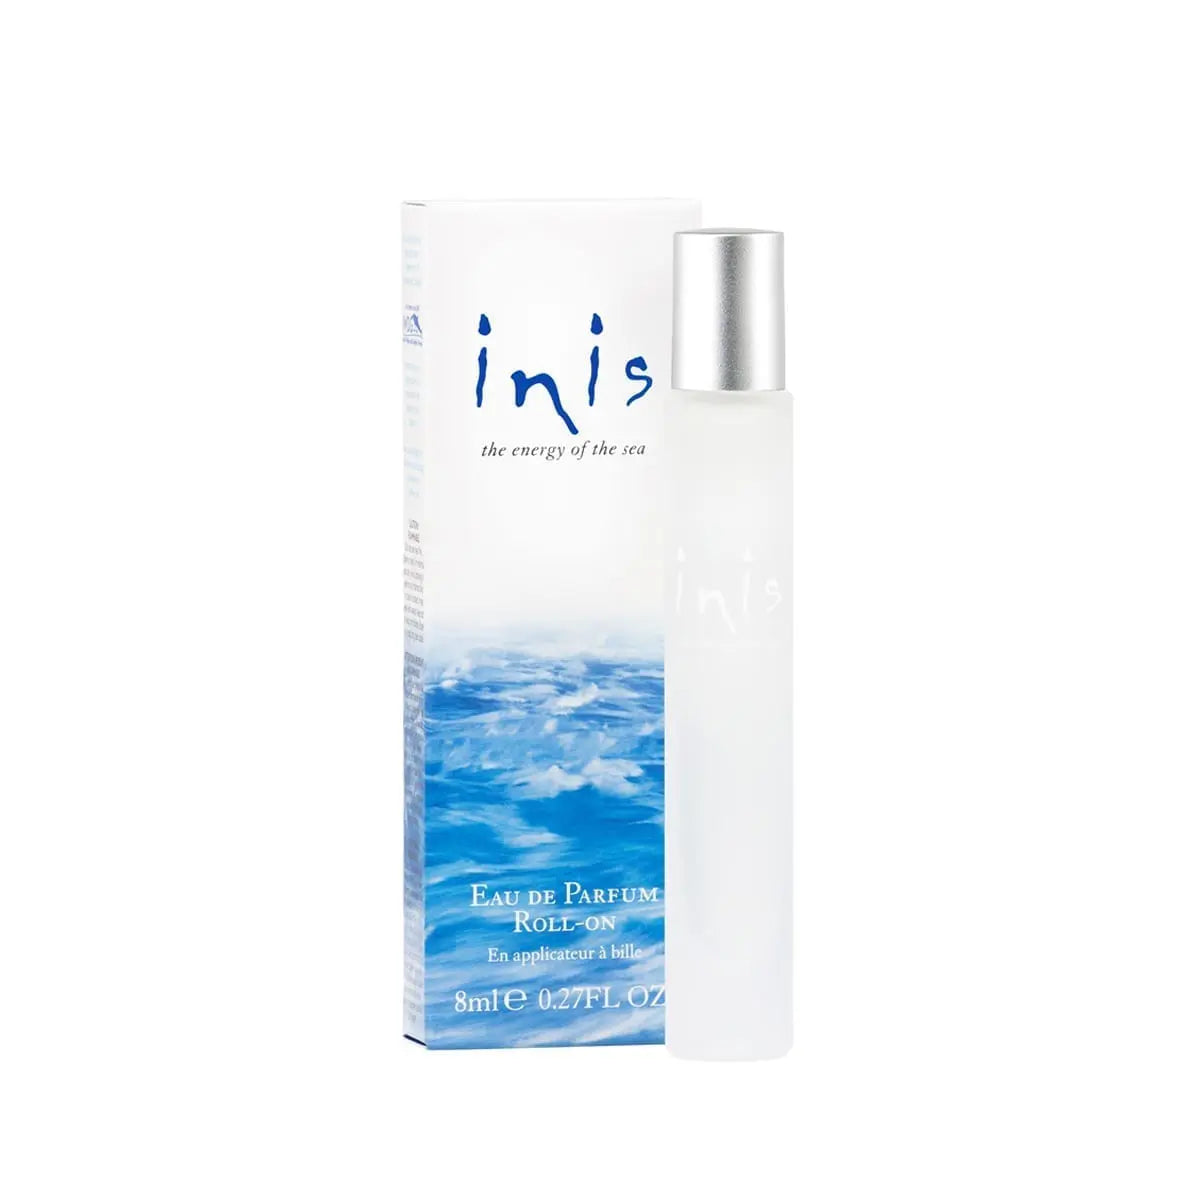 Inis Energy Of The Sea Roll On .27 fl oz